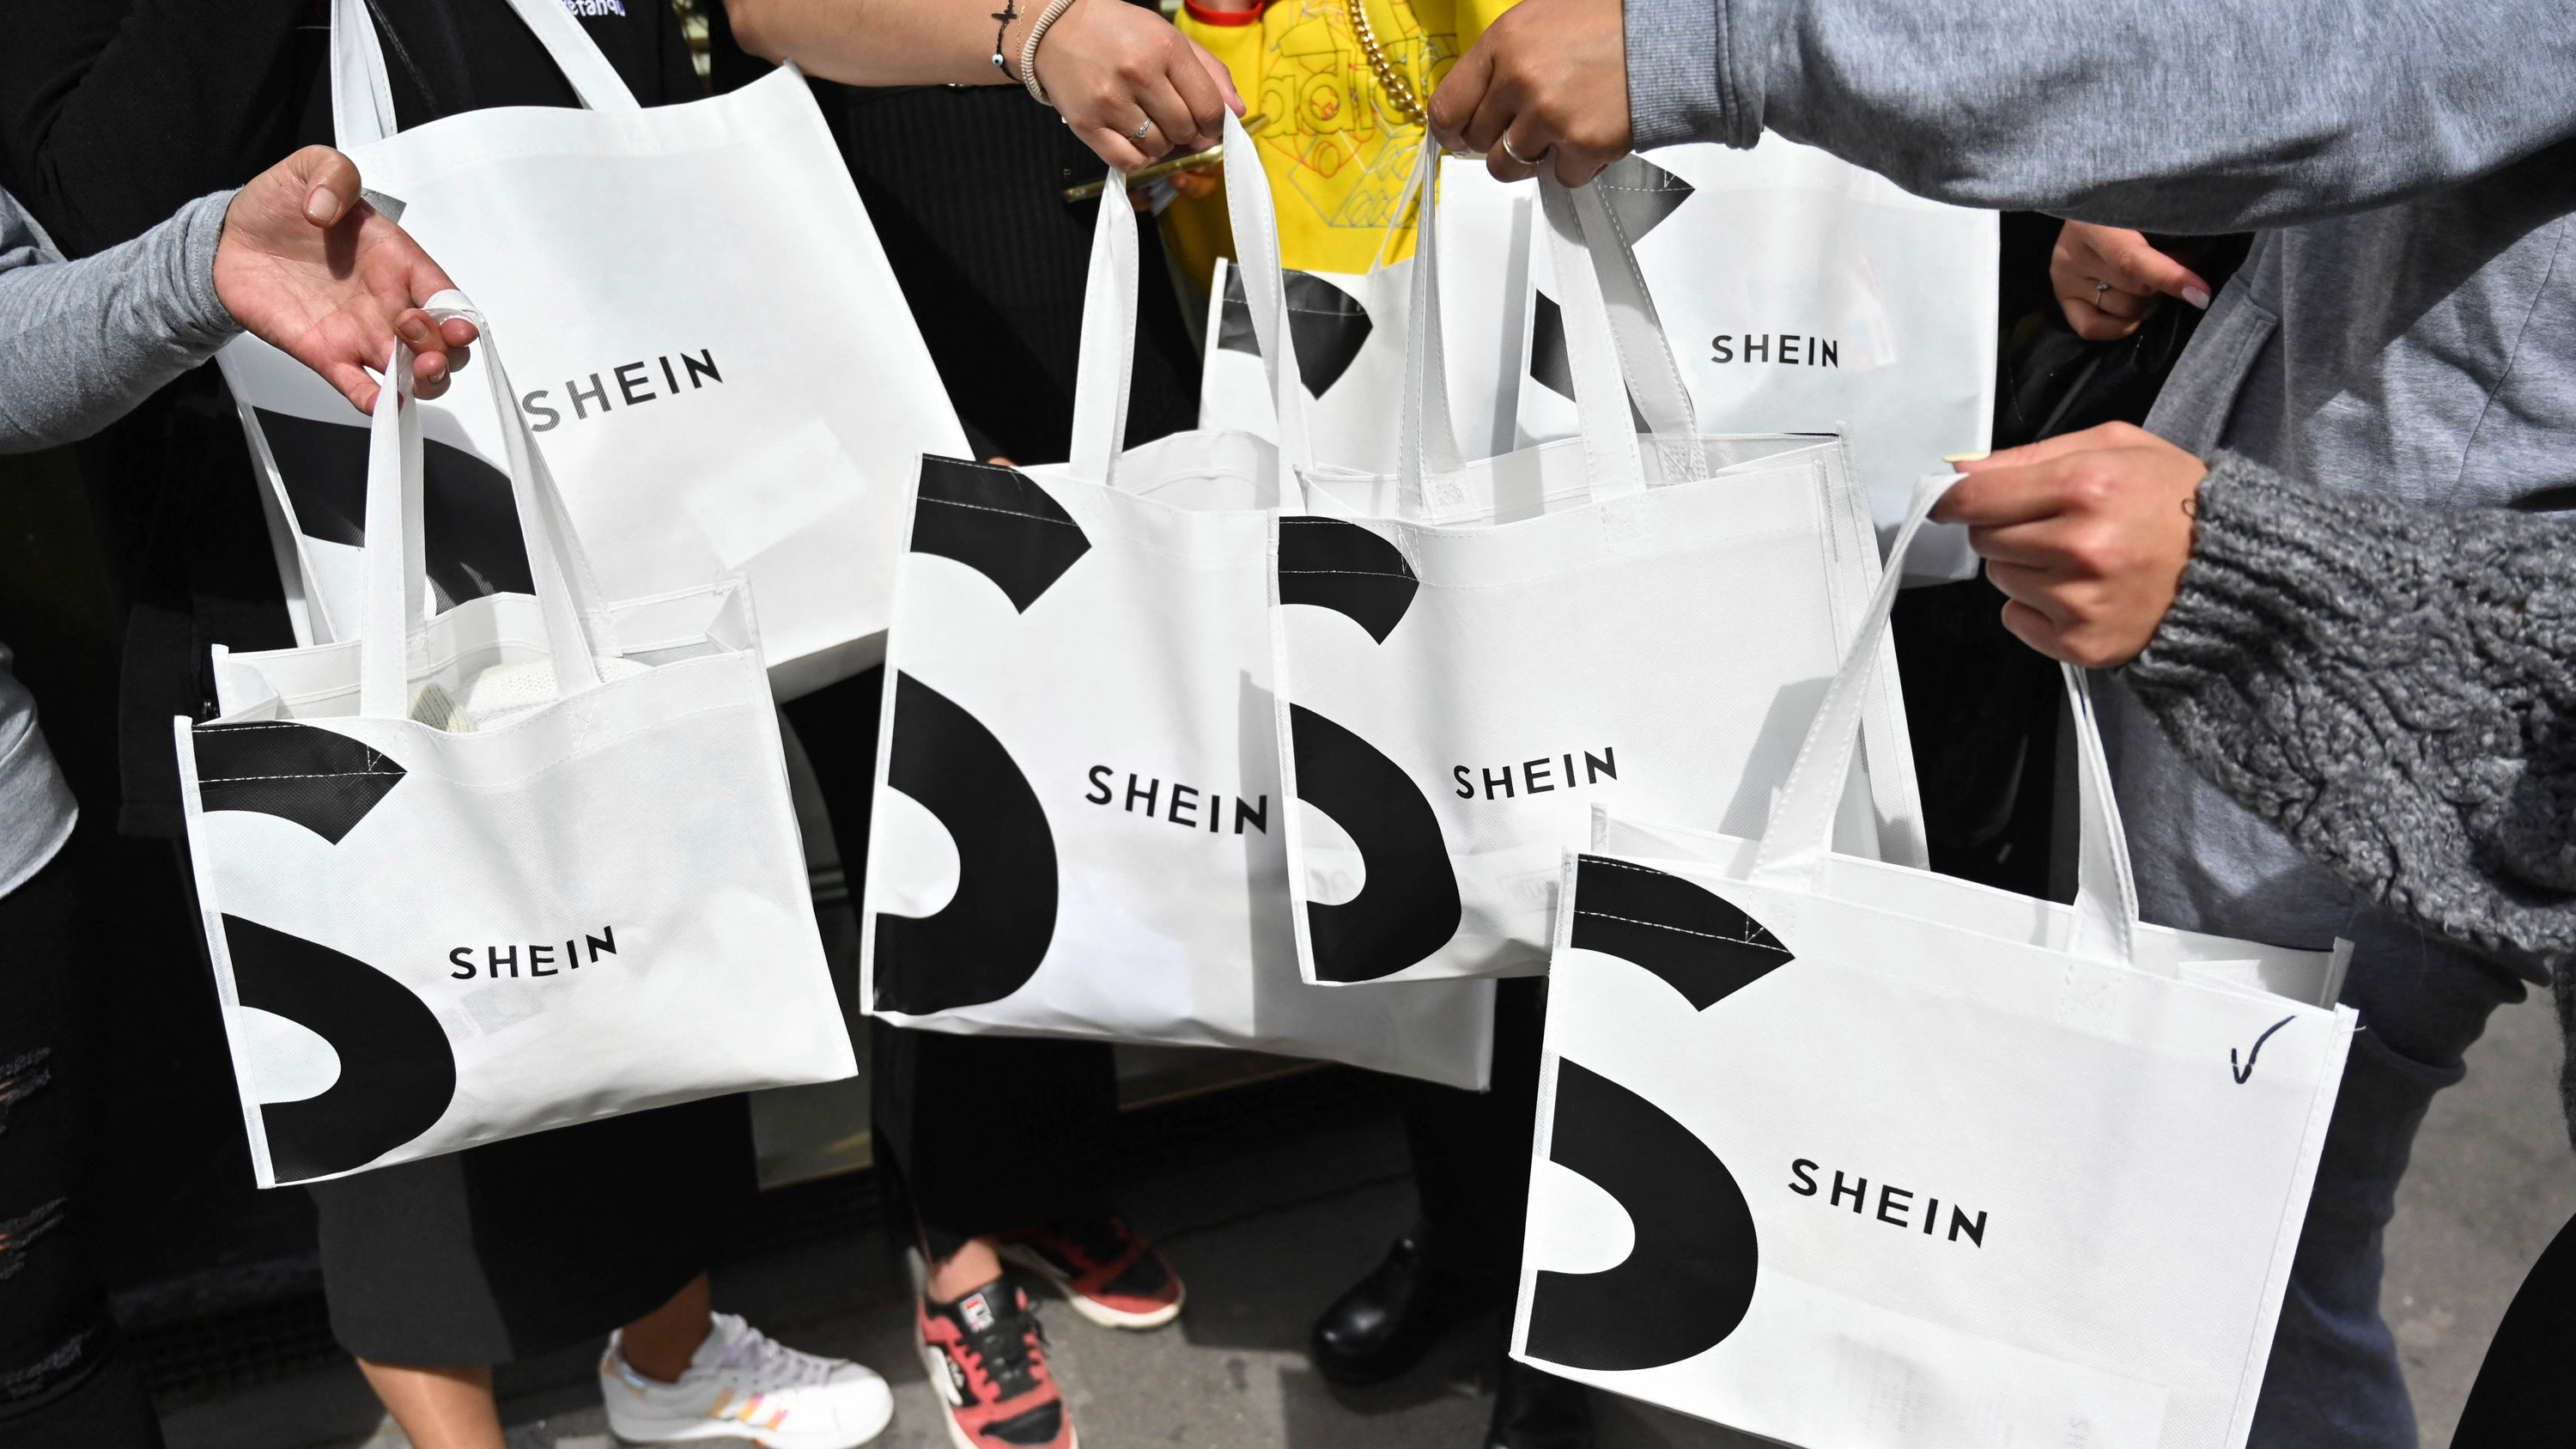 Shein plastic bags are as trendy as its clothing in Latin America - Rest of  World